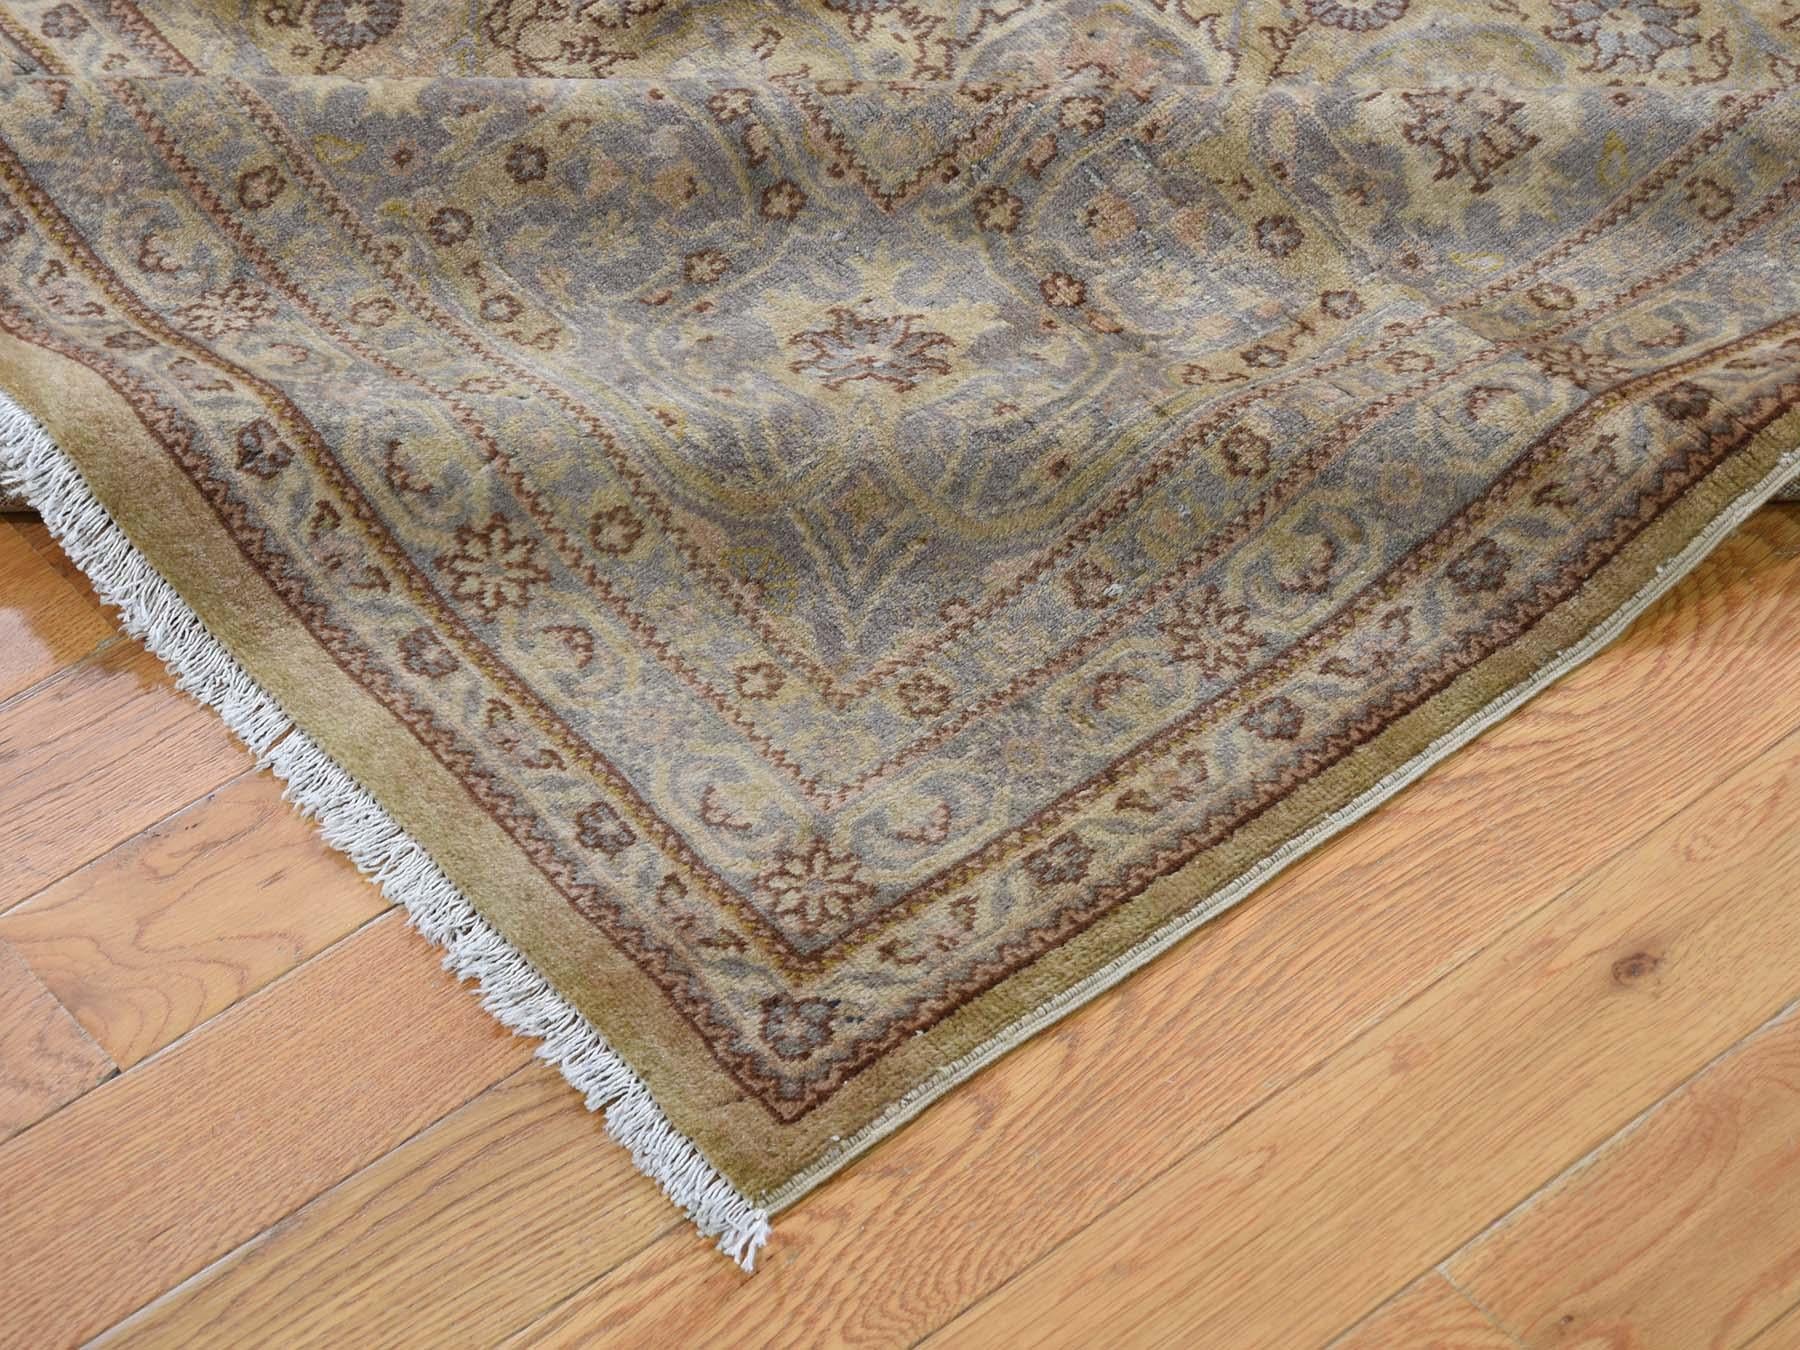 1920 Turkish Sivas Rug Even Wear and Soft, Camel and Beige In Good Condition For Sale In Carlstadt, NJ